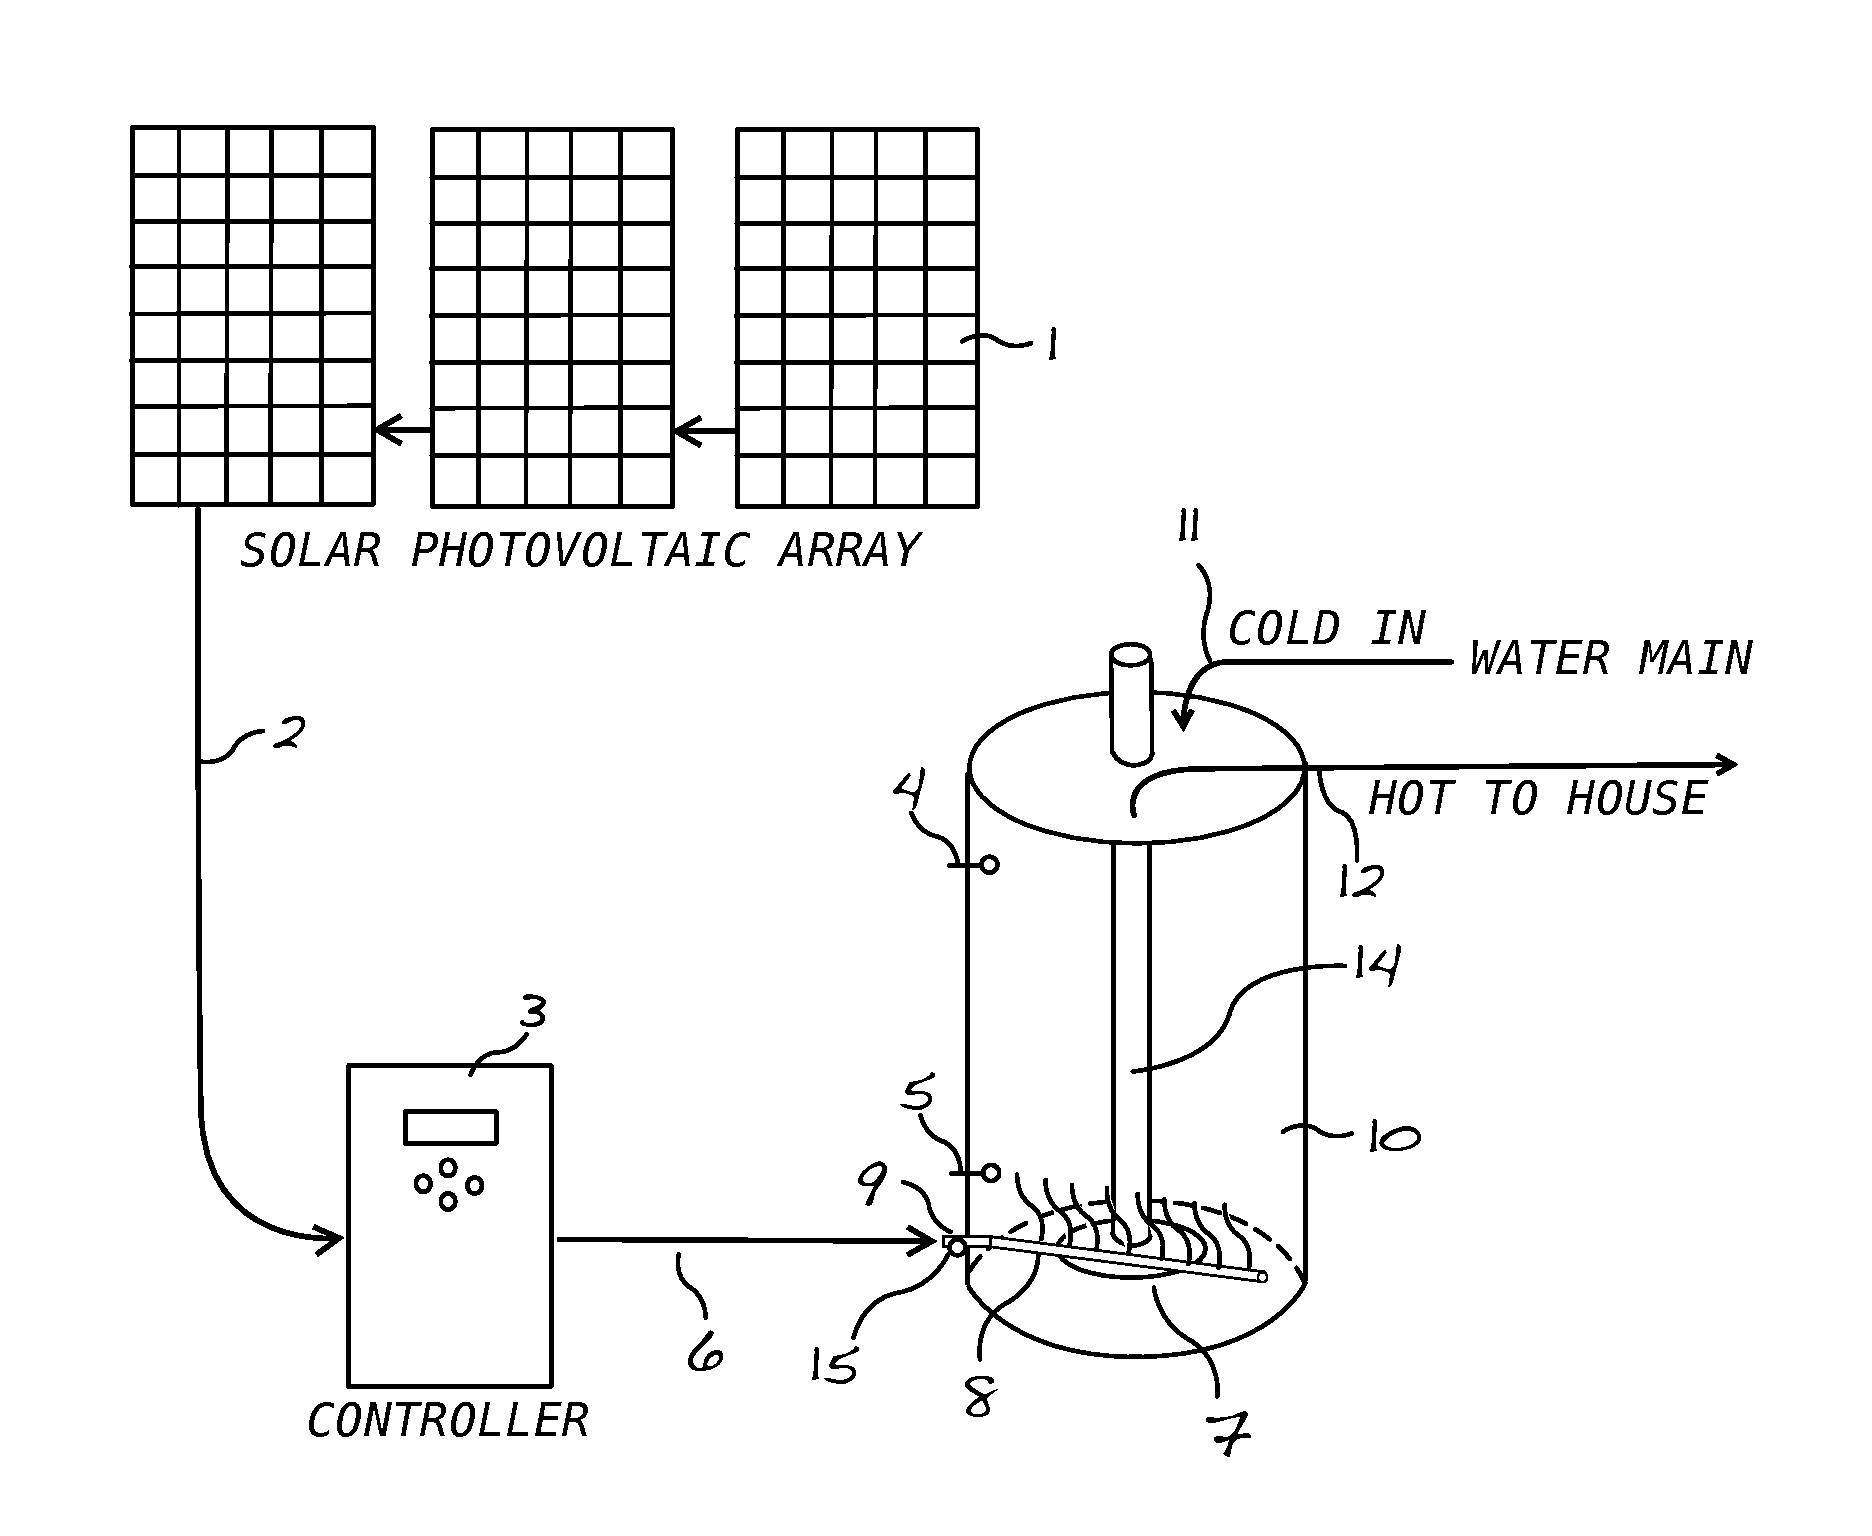 Solar photovoltaic water heating system utilizing microprocessor control and water heater retrofit adaptor